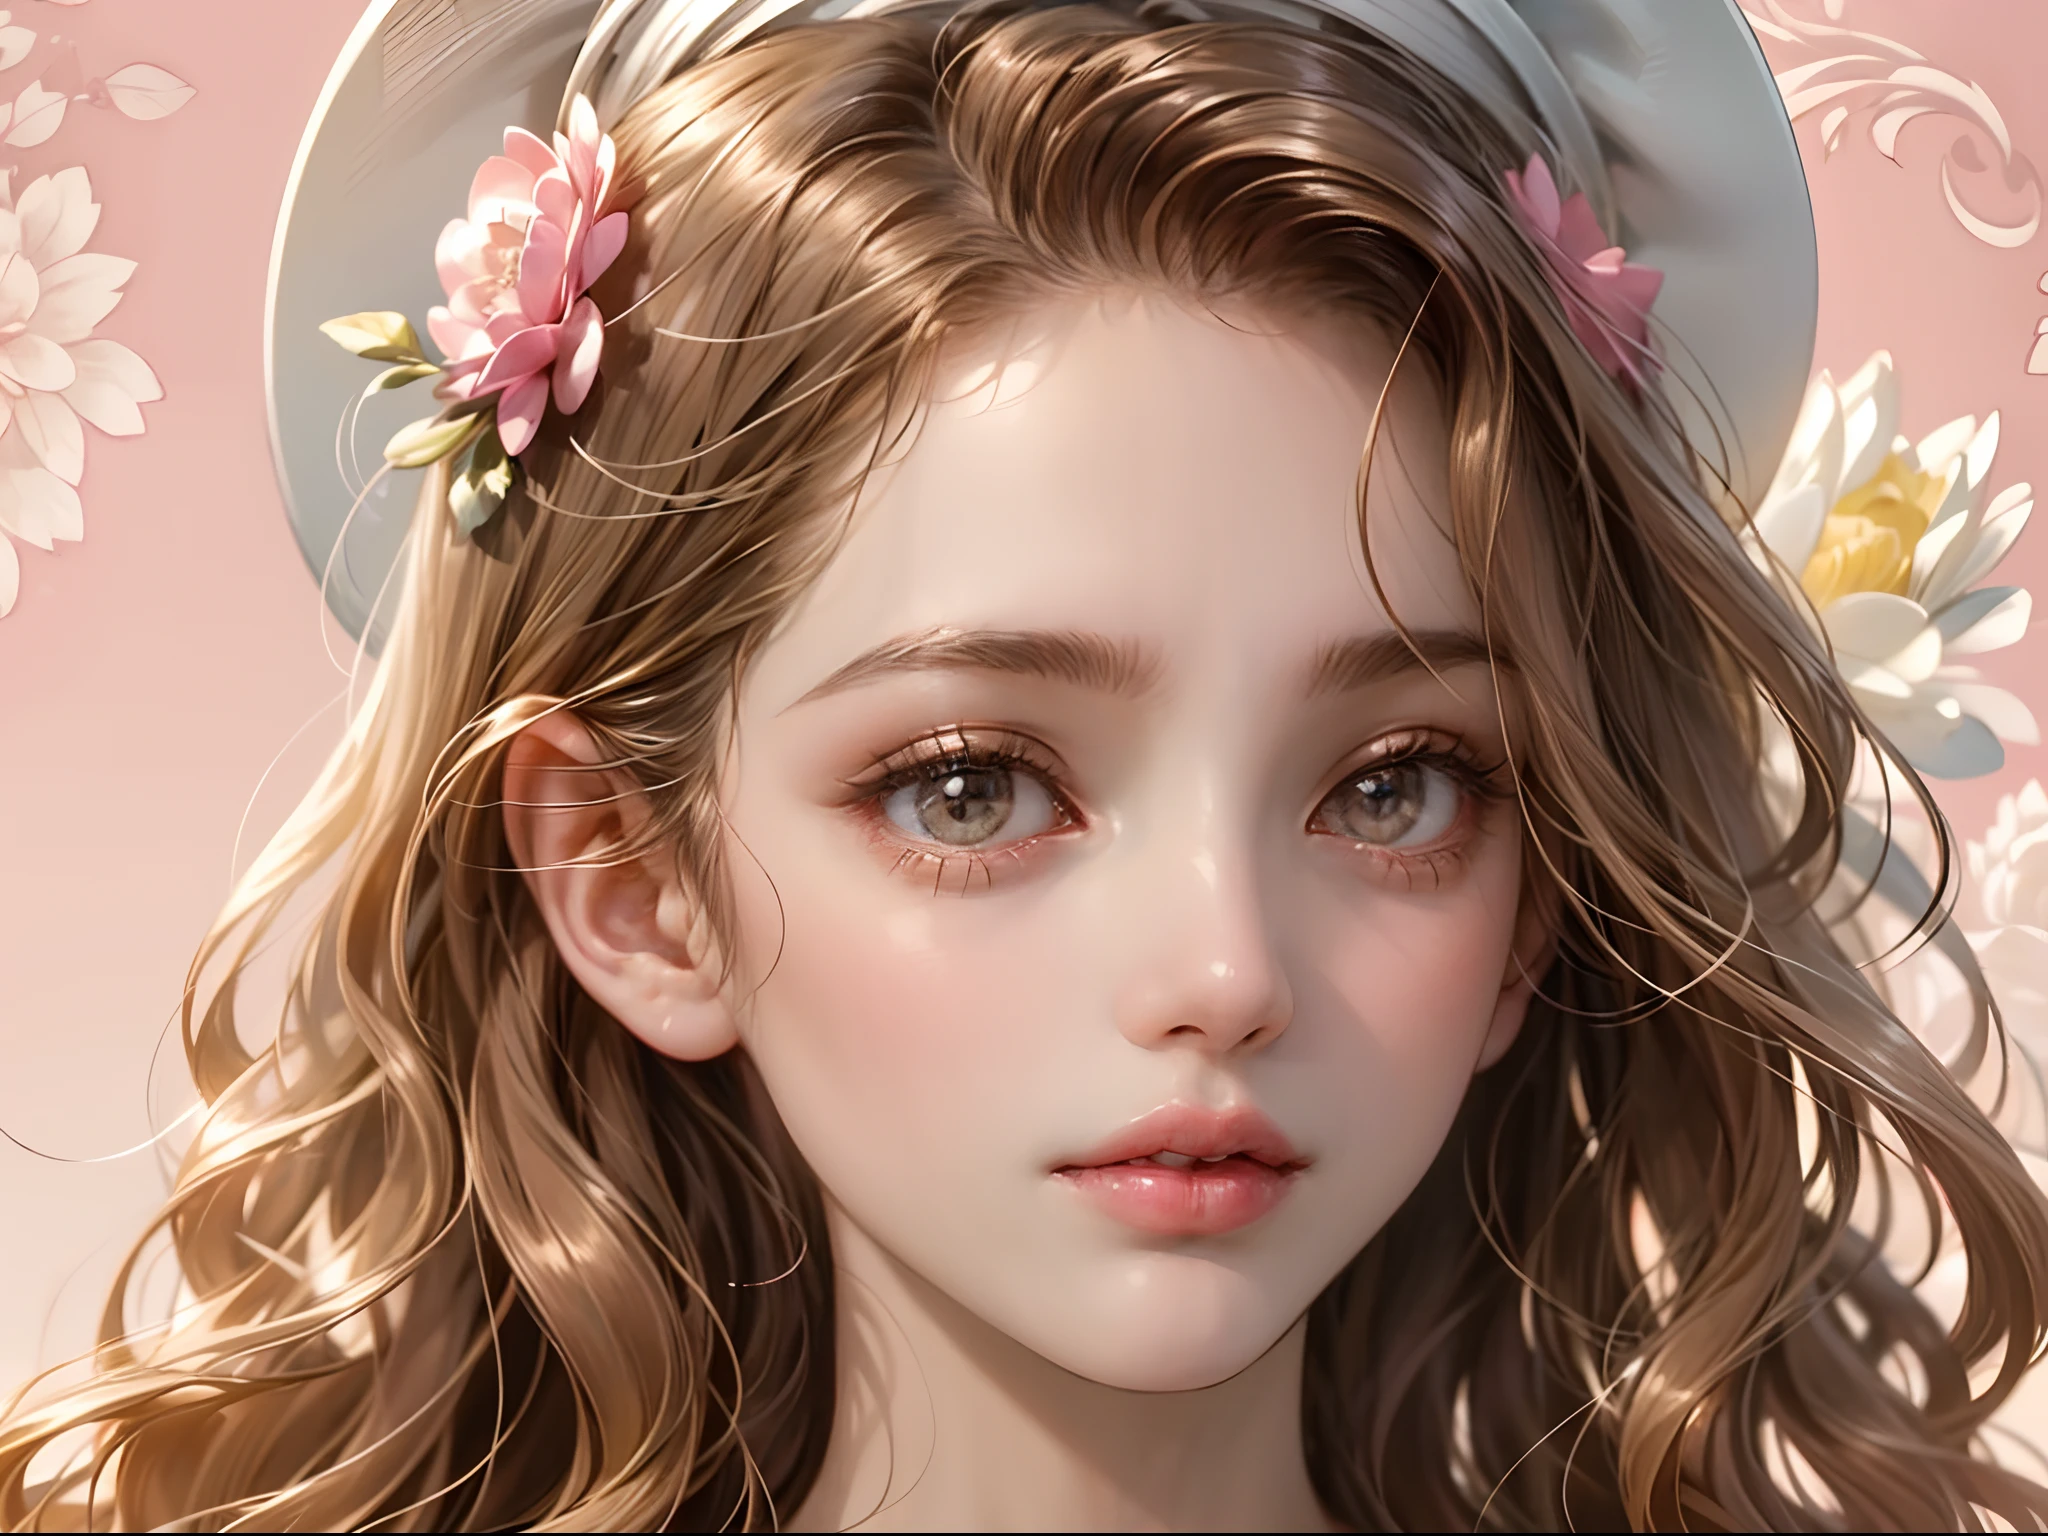 1 year old ，closeup of face，Chubby little face，Big round eyes，Curly hair，Long hair，Q version avatar，Moe，Cute style，Delicate and exquisite，Head portrait，Close-up of the head，Lotus pink background，the soft light